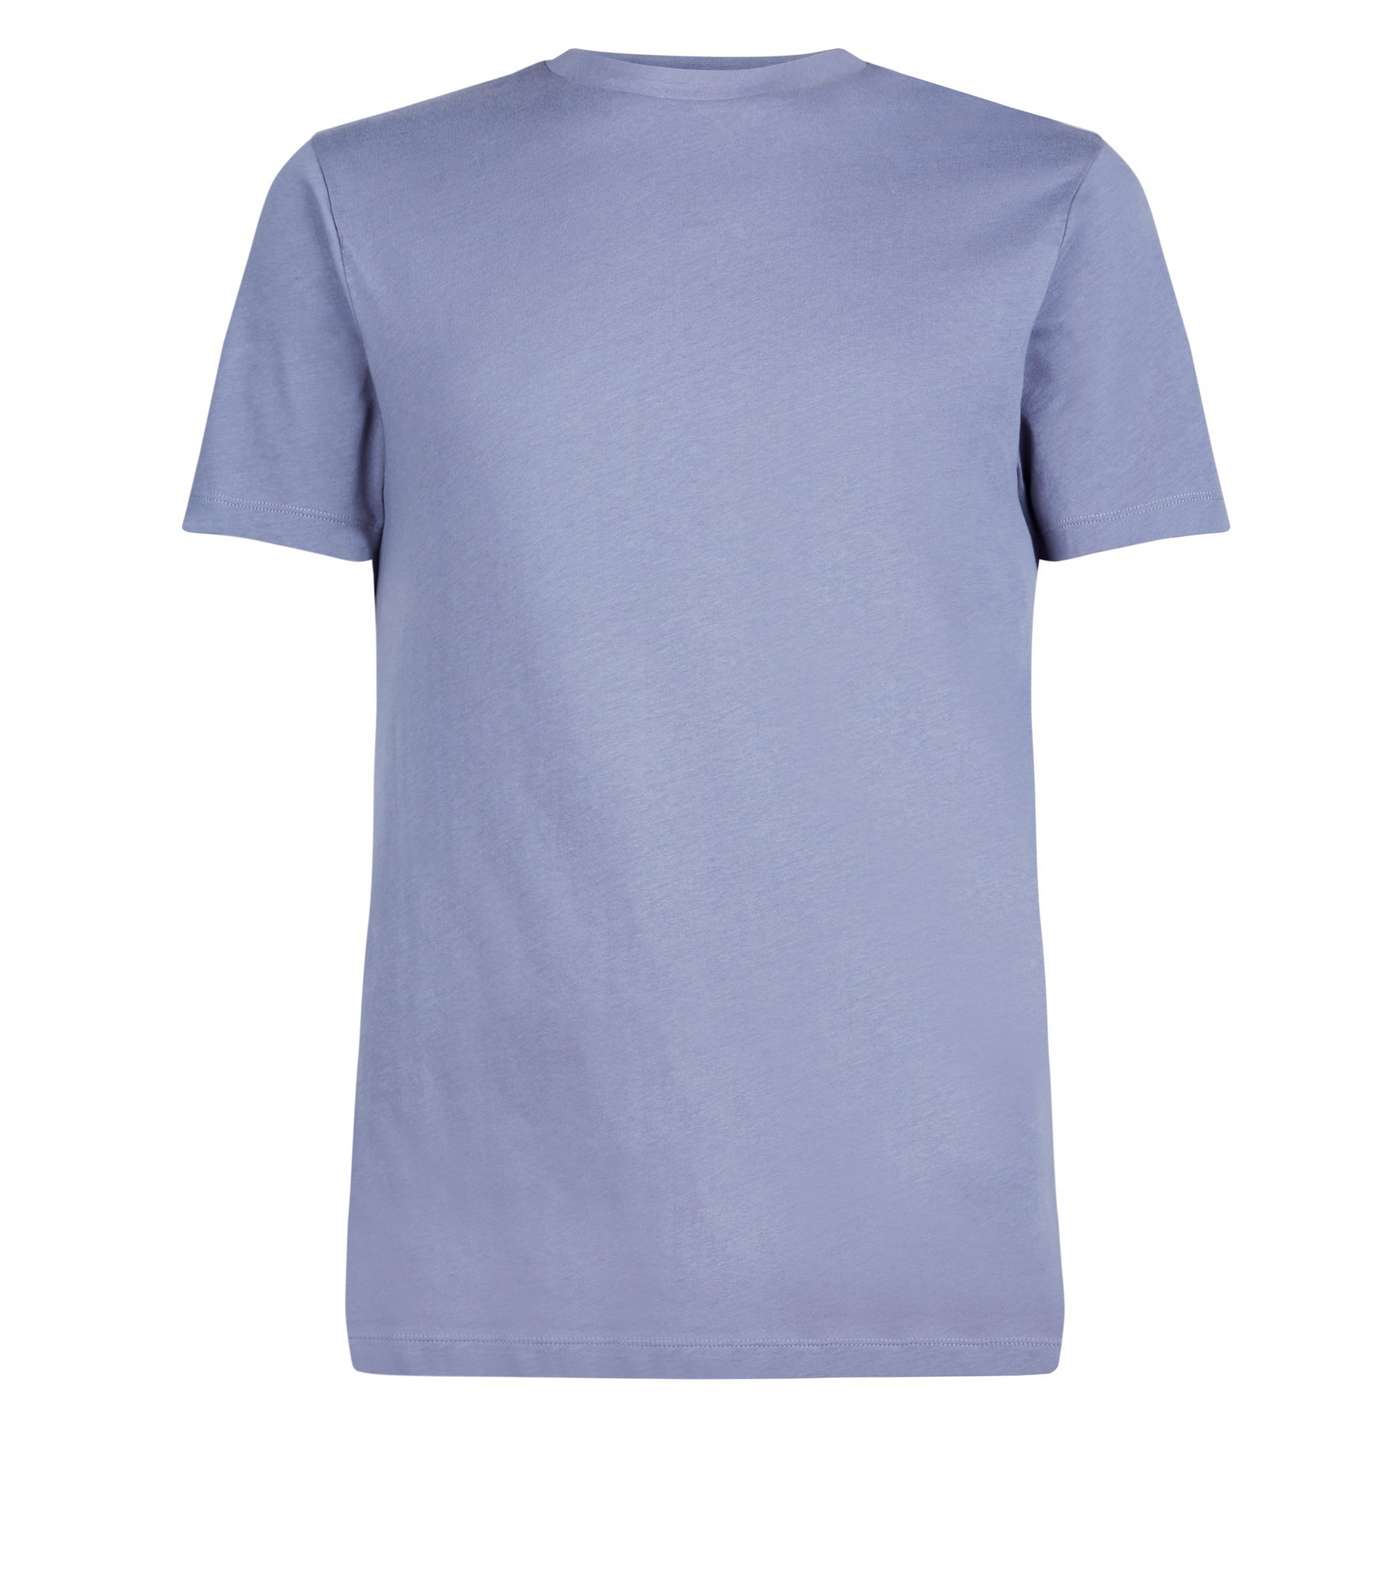 Pale Blue Short Sleeve Muscle Fit T-Shirt Image 4